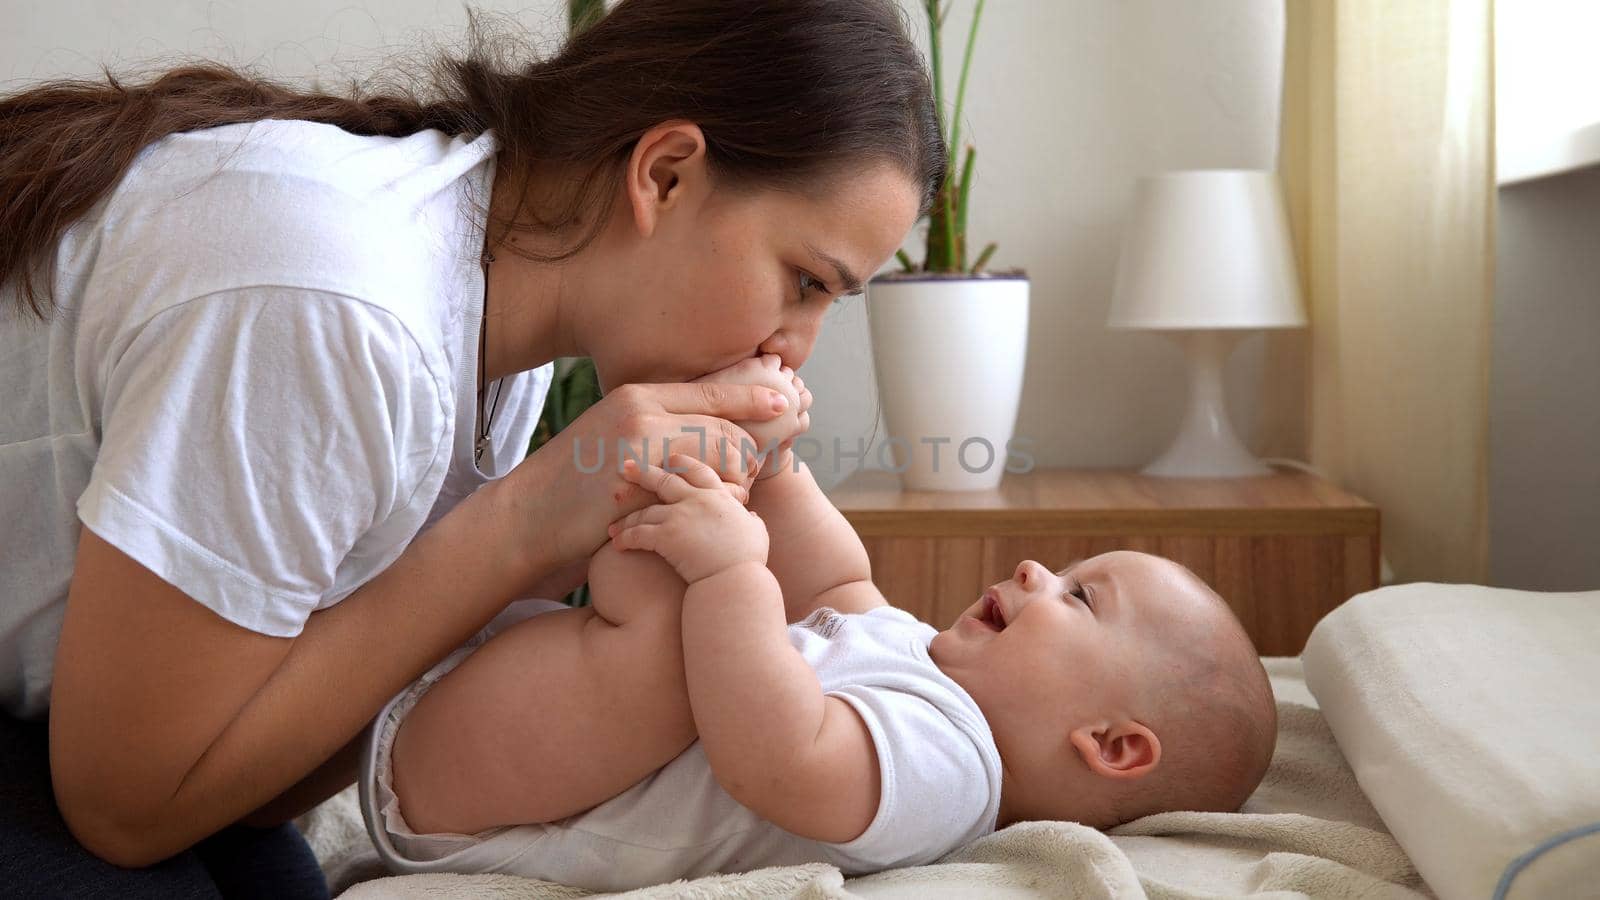 Authentic Young Caucasian Woman Holding Newborn Baby. Mom And Child On Bed. Close-up Portrait of Smiling Family With Infant On Hands. Happy Marriage Couple On Background. Childhood, Parenthood Concept.